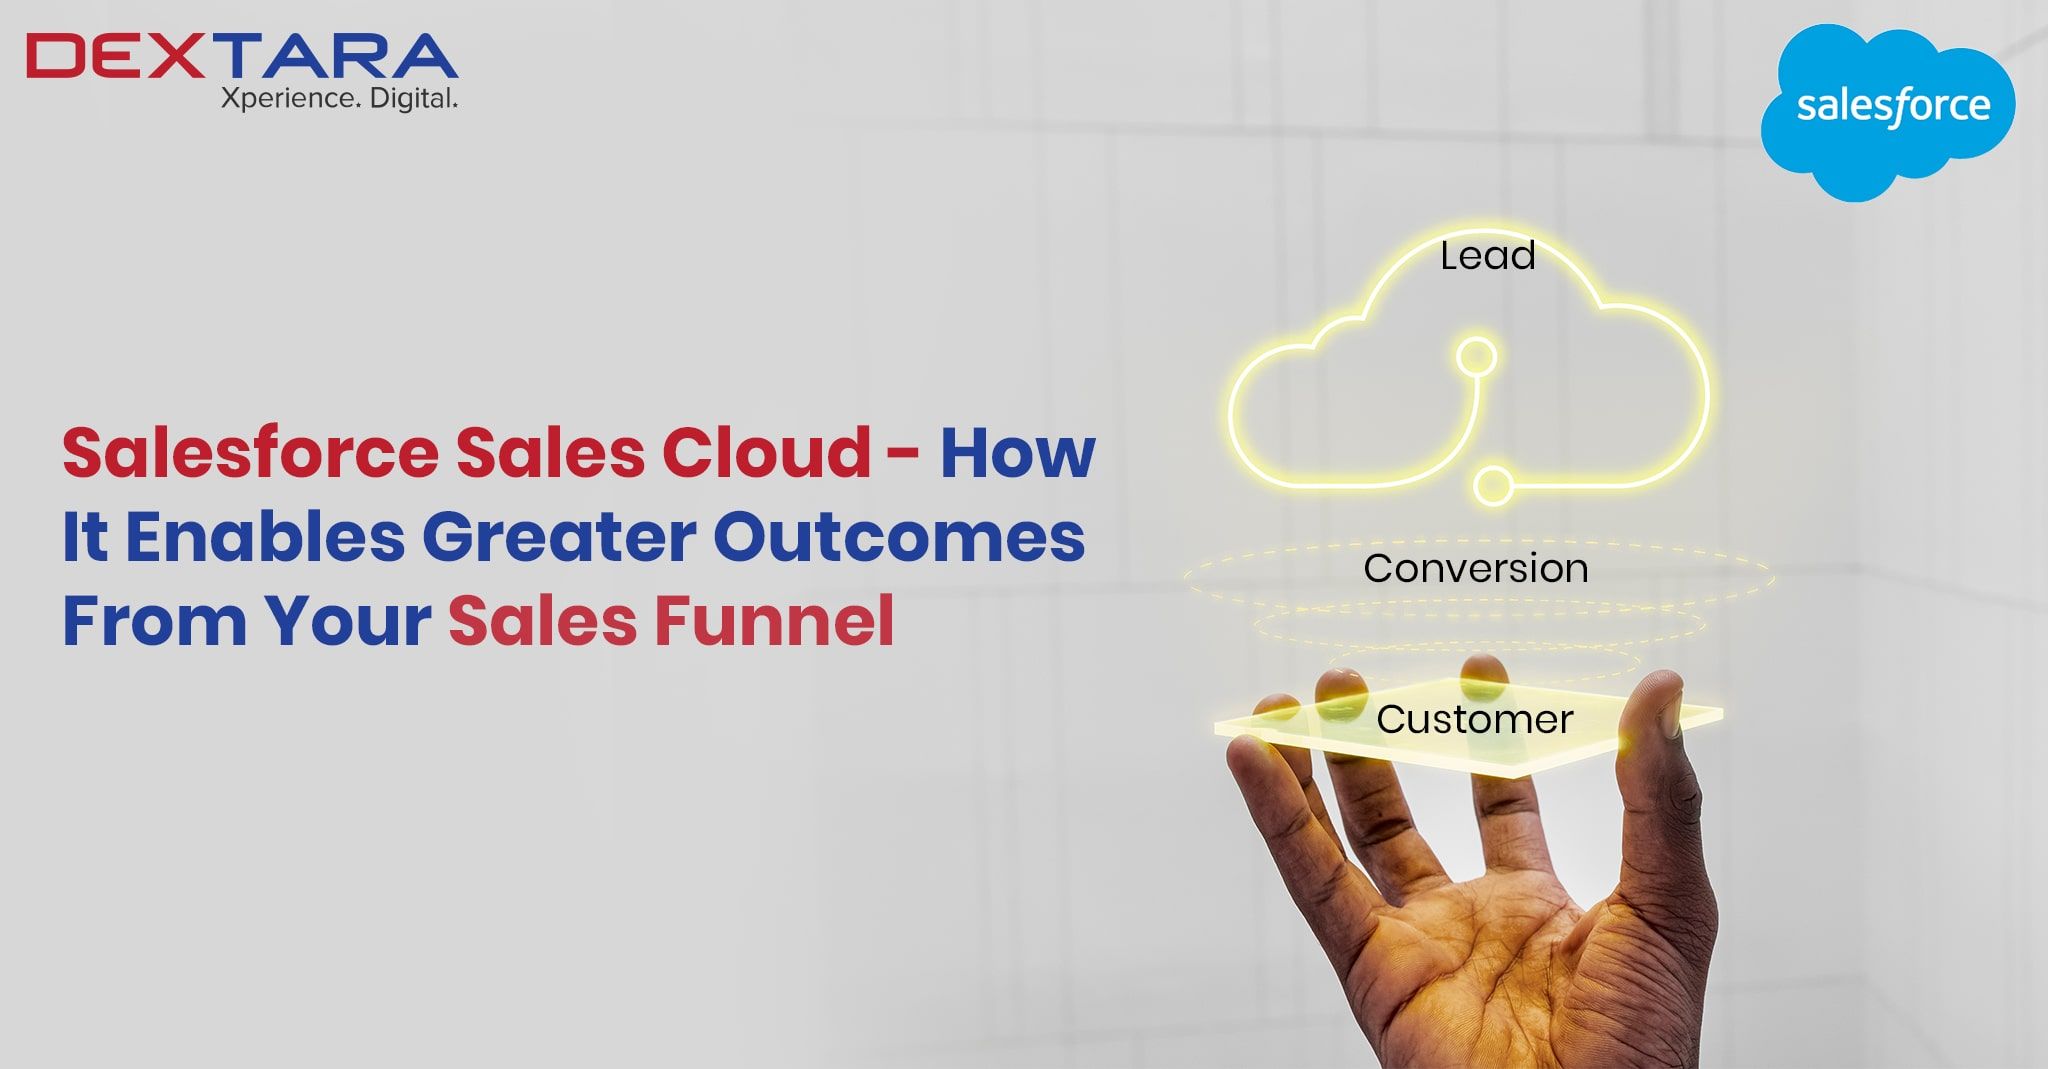 Salesforce Sales Cloud is automating the marketing and sales funnel